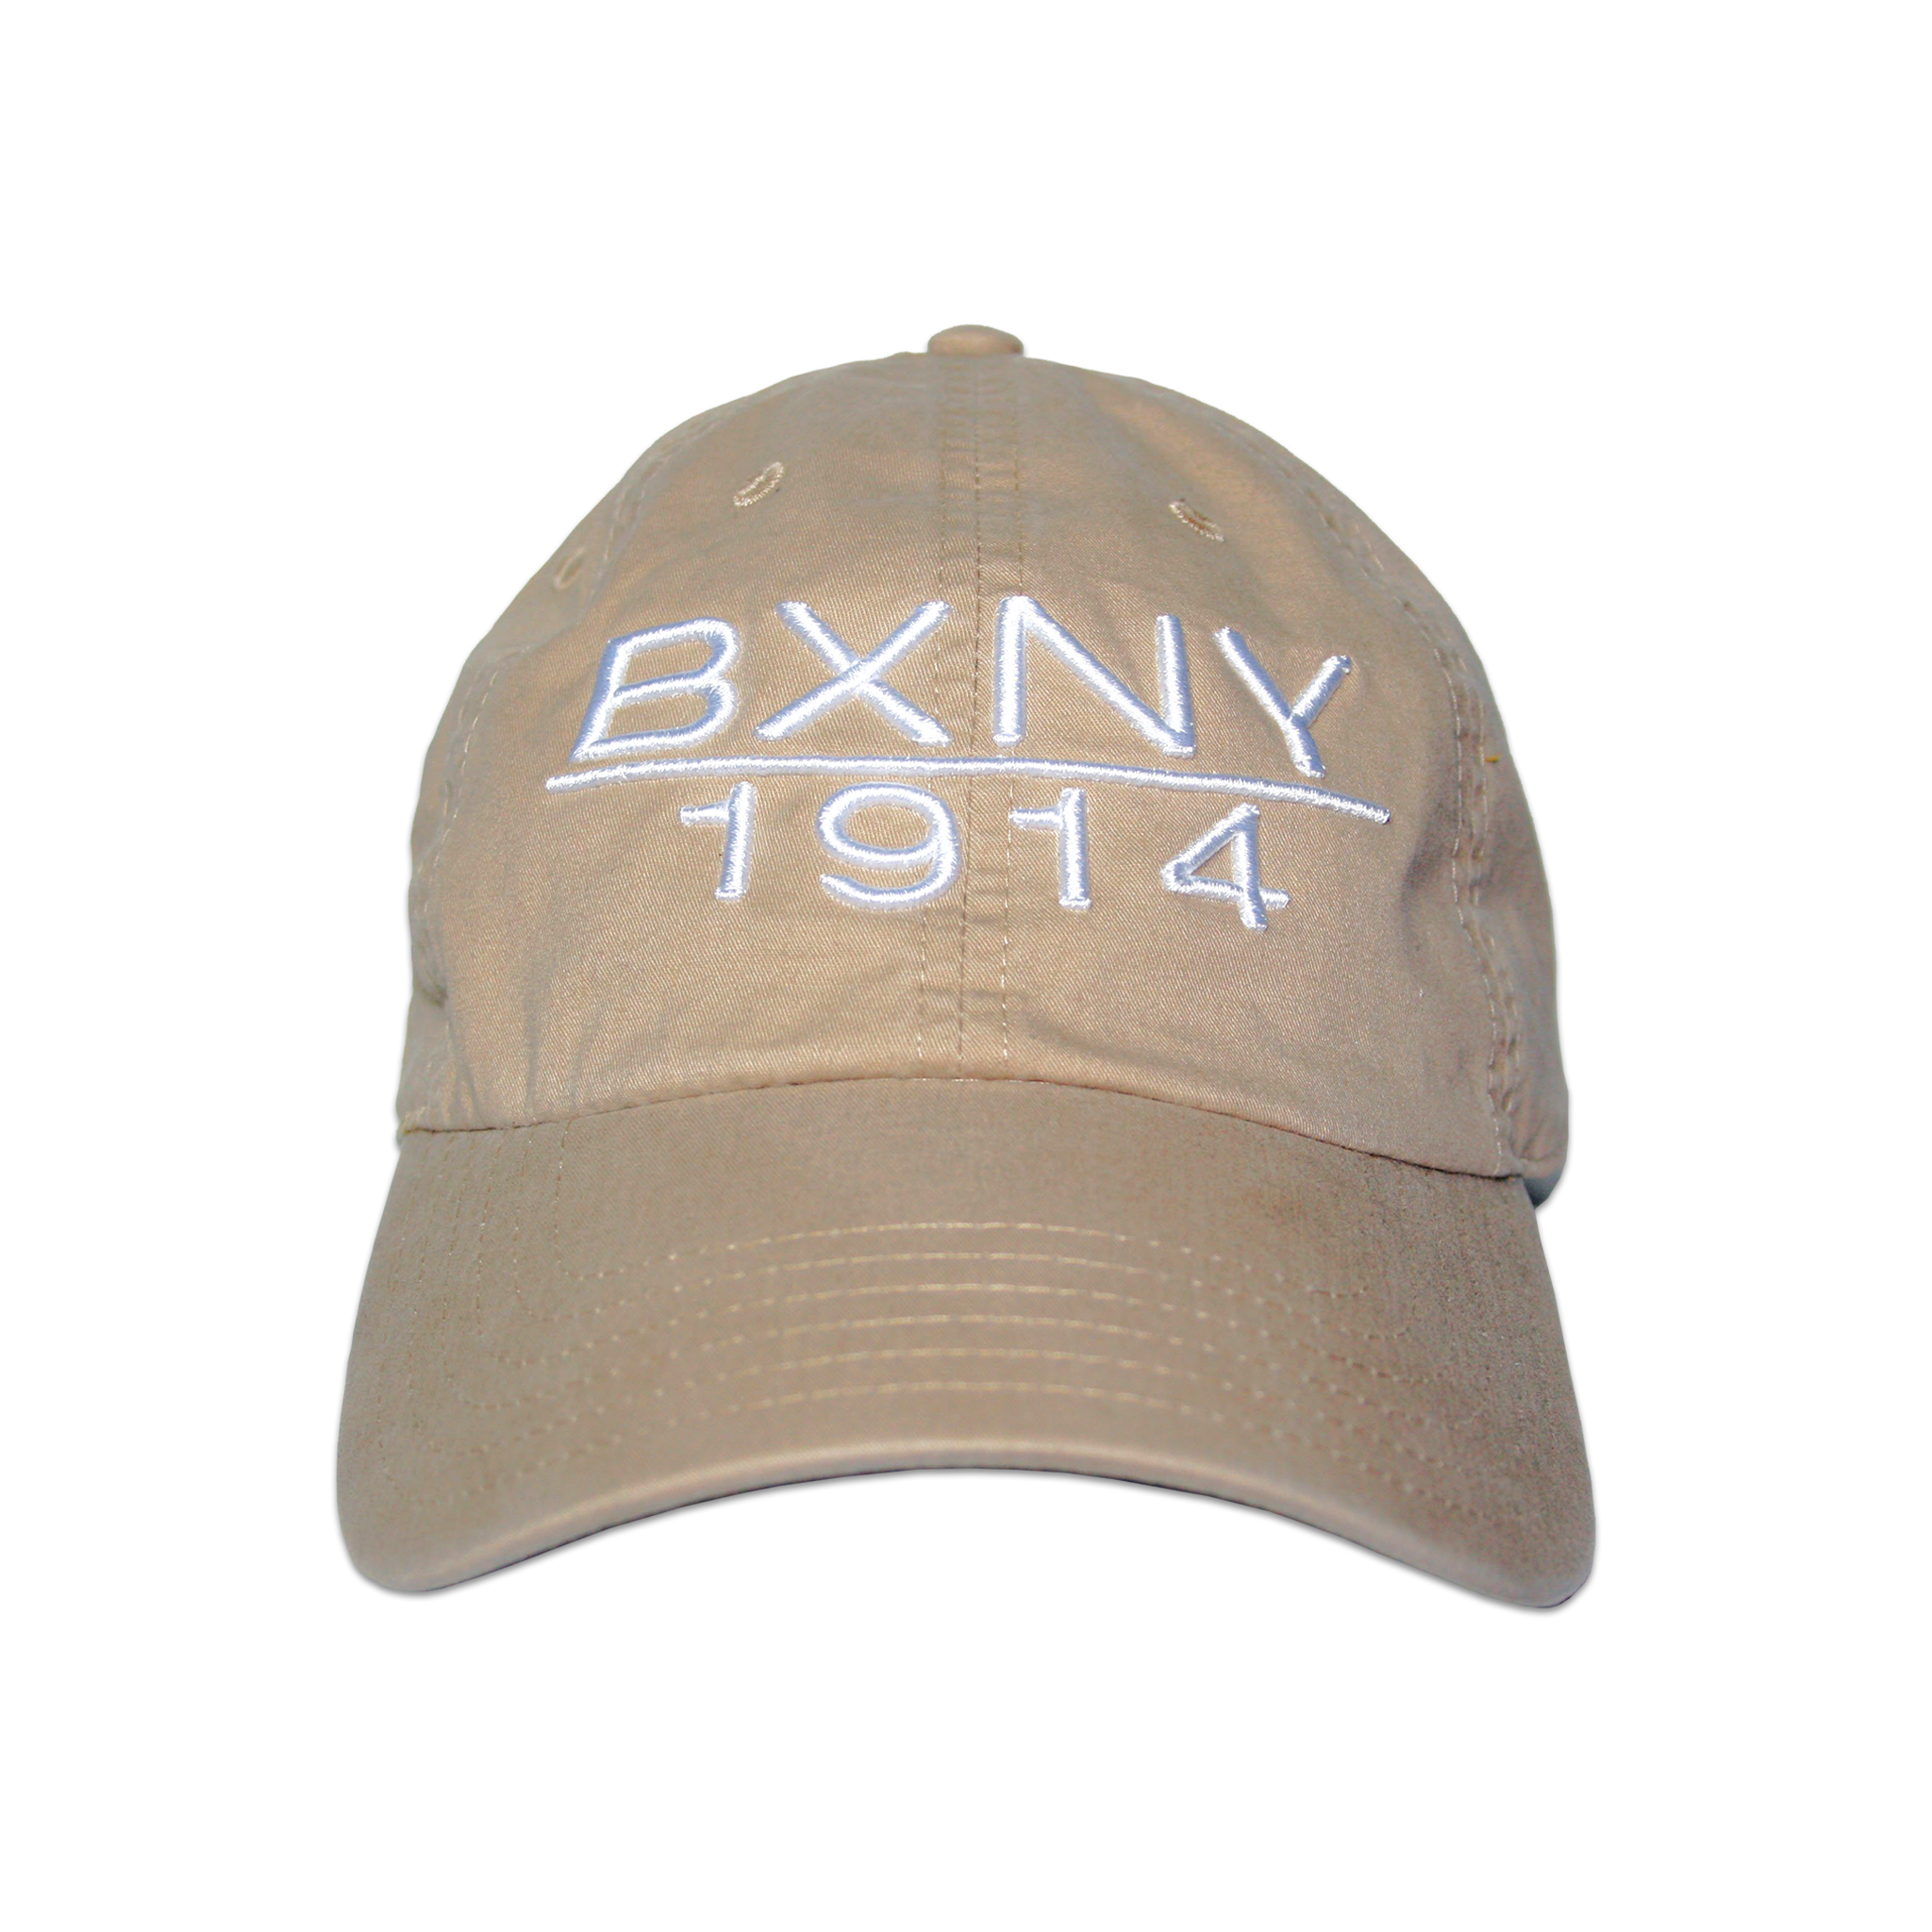 BXNY 1914 Dad Hat Front in Khaki